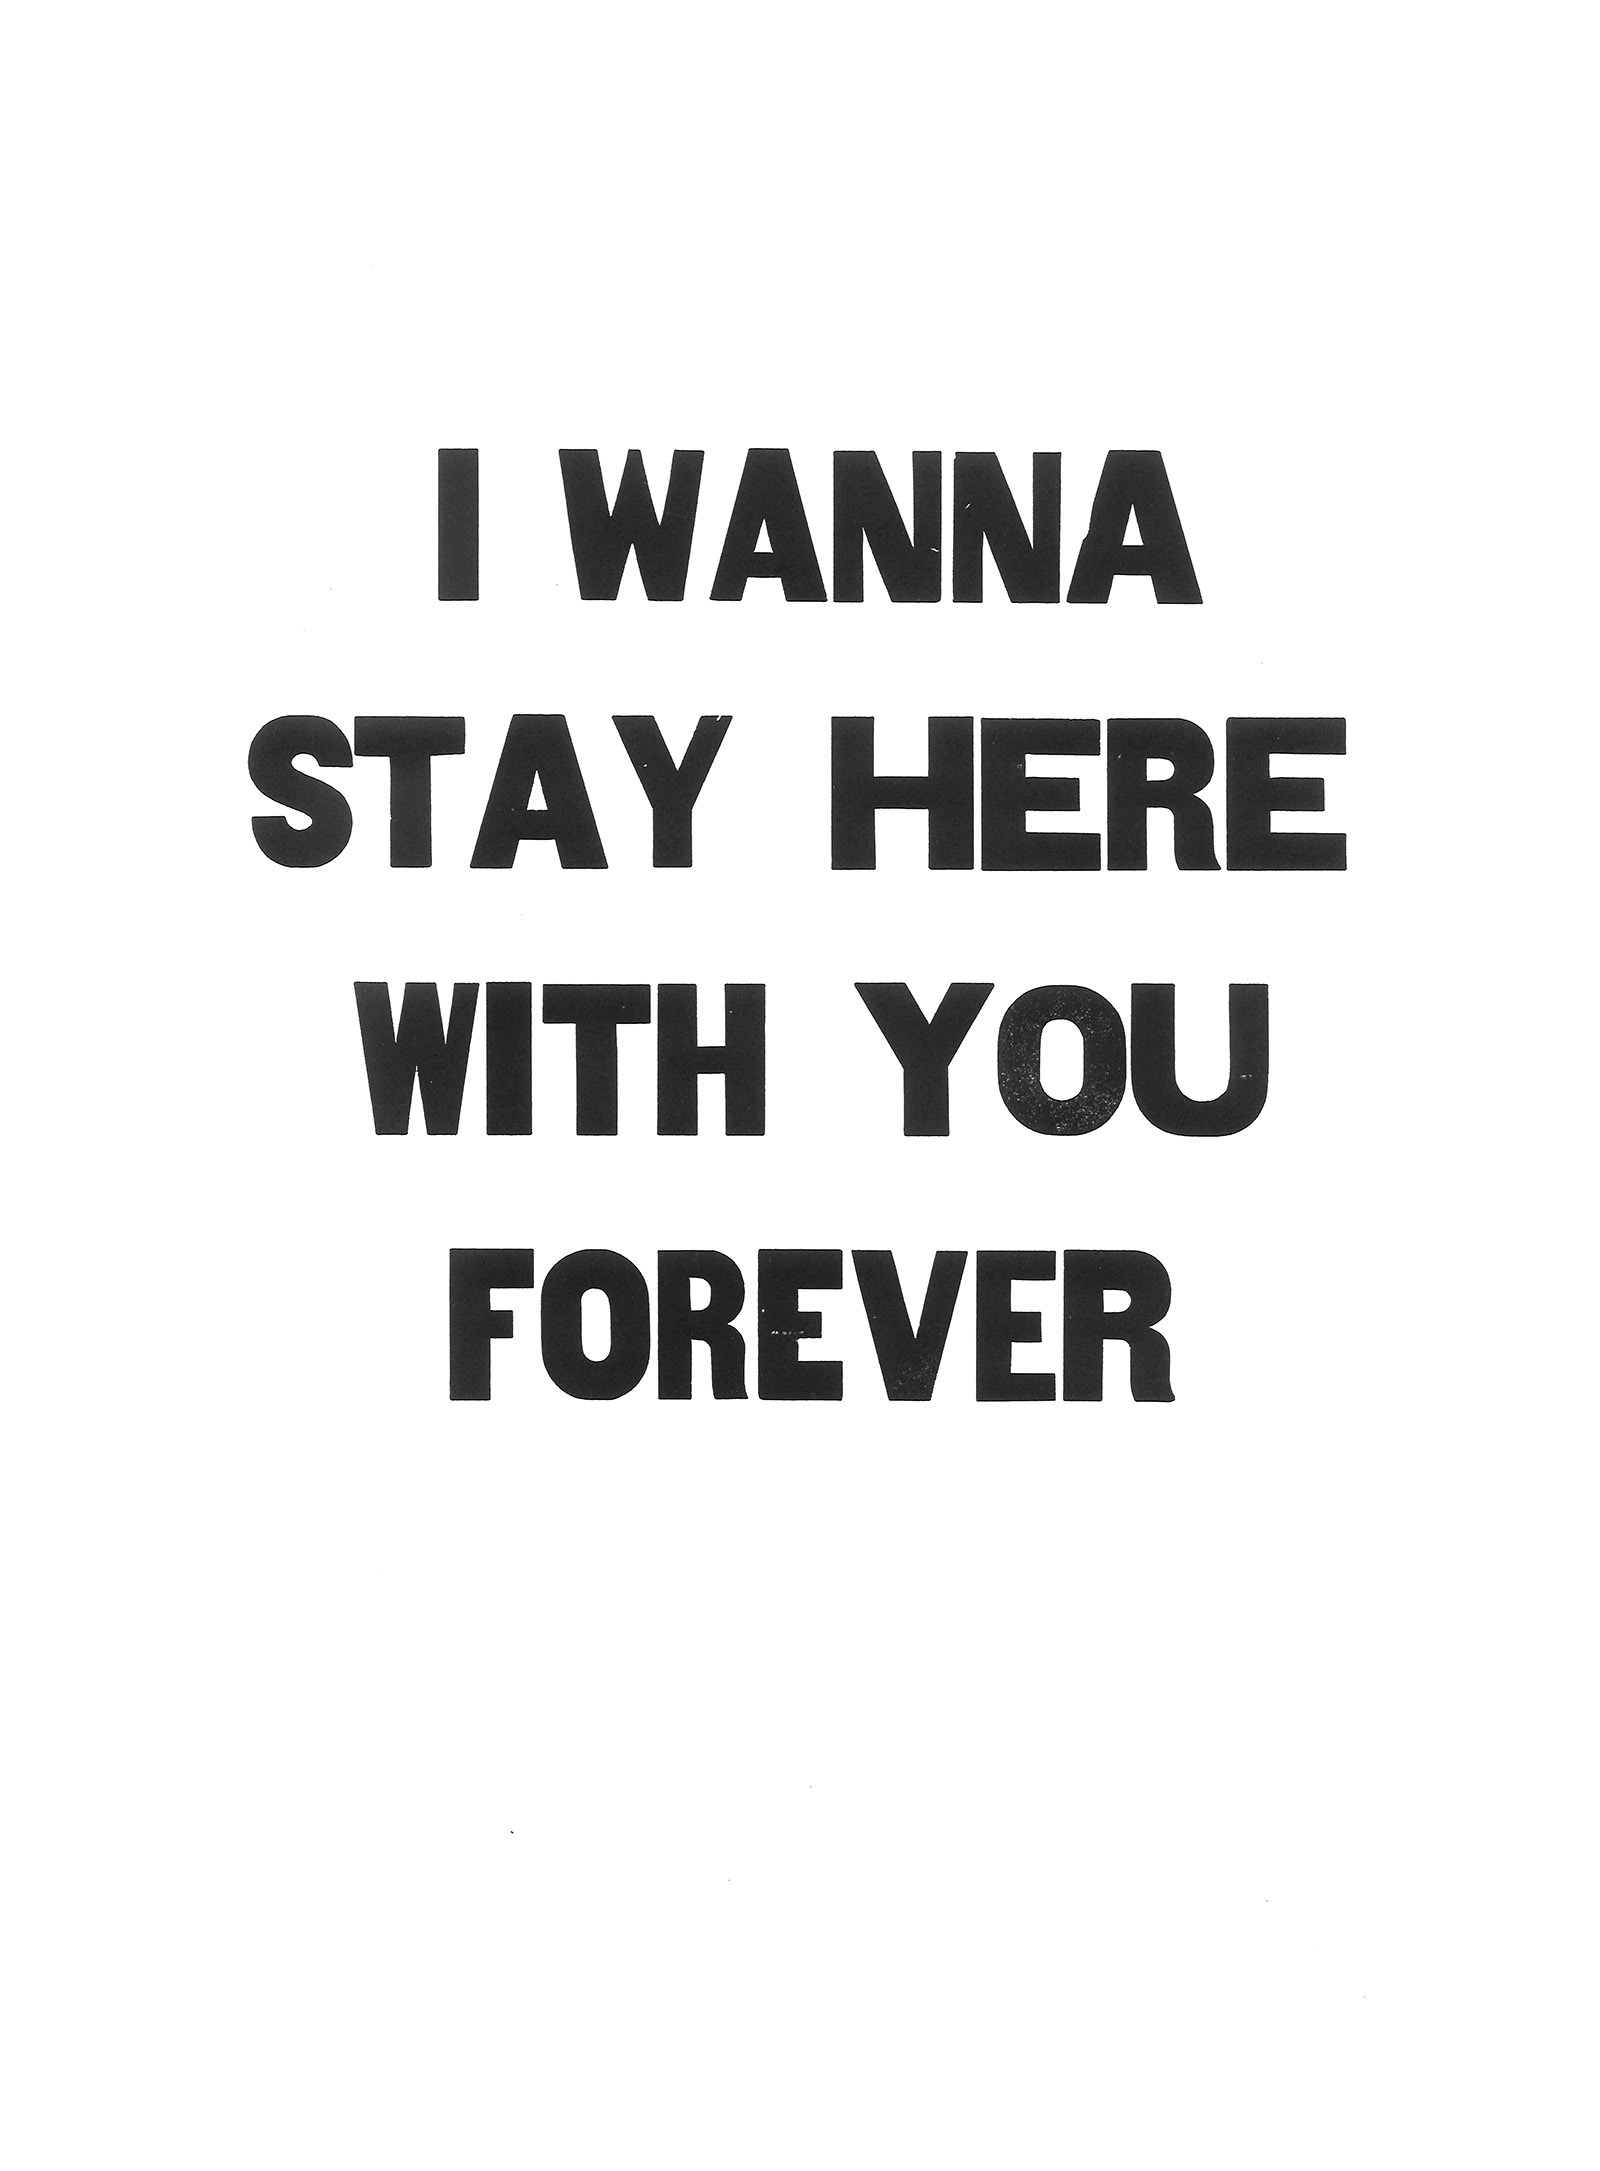 I wanna stay here with you forever